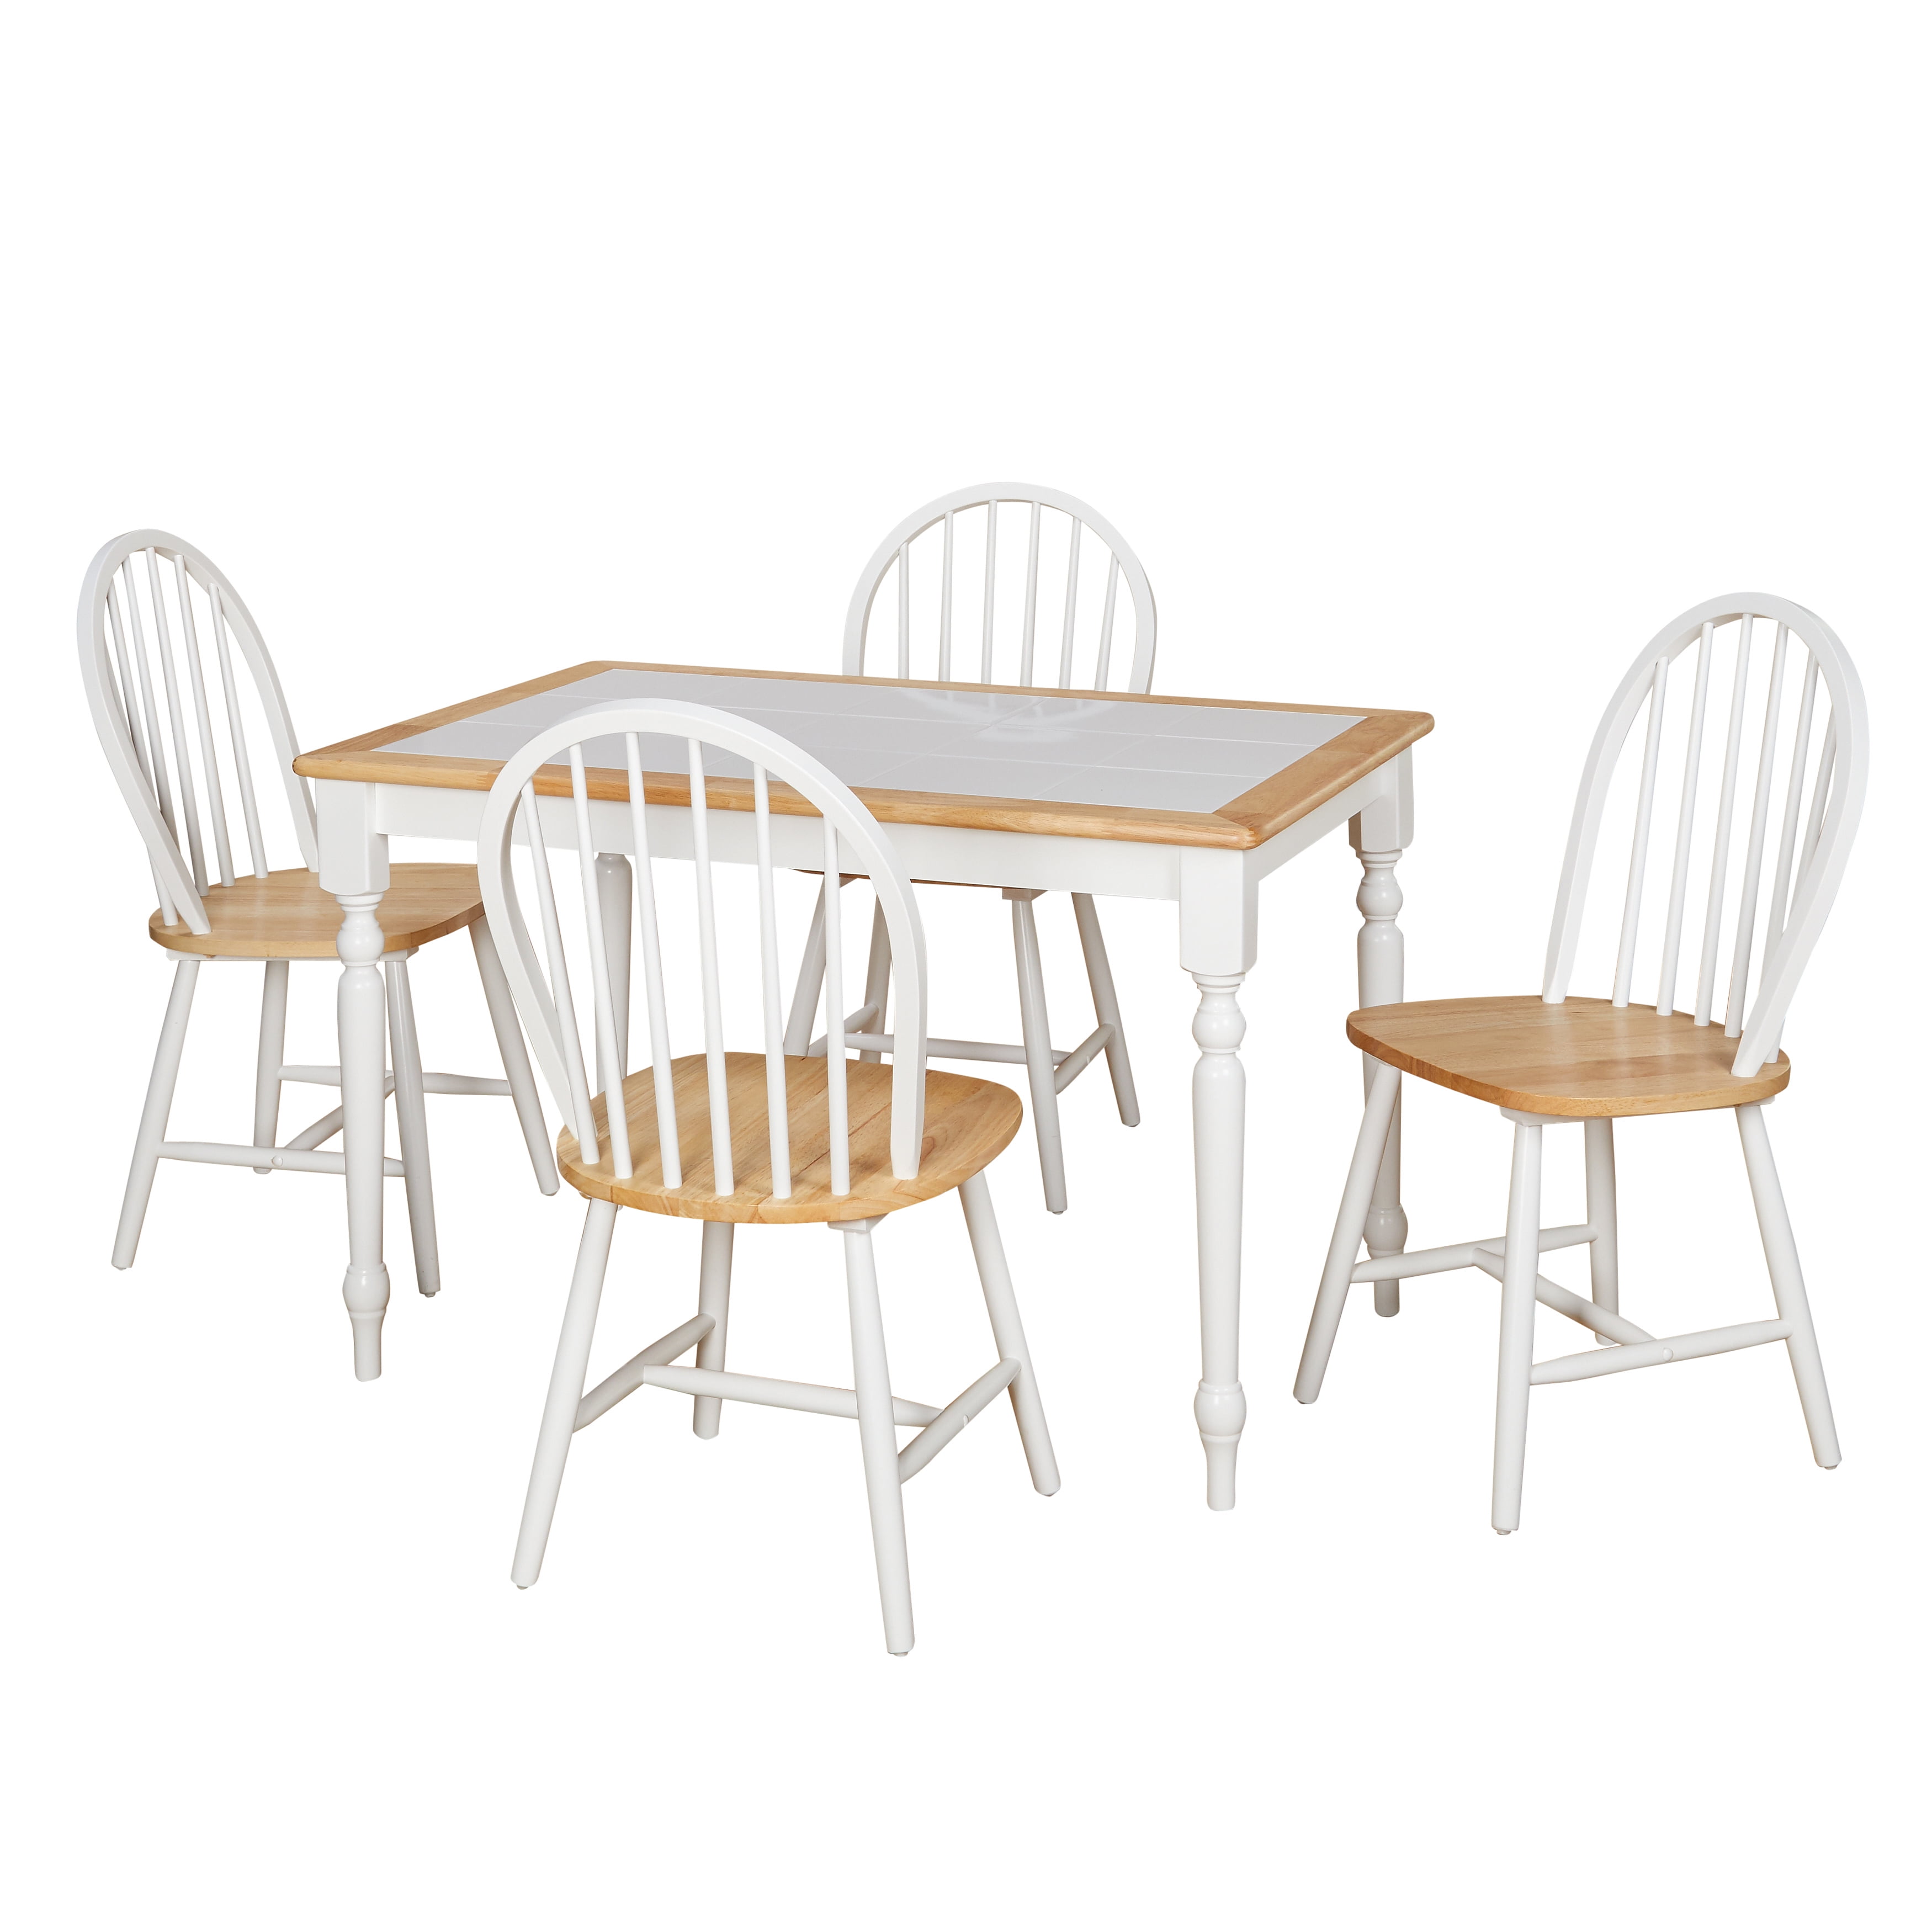 Tara Tile Top Table White Natural, Tile Top Kitchen Table And Chairs